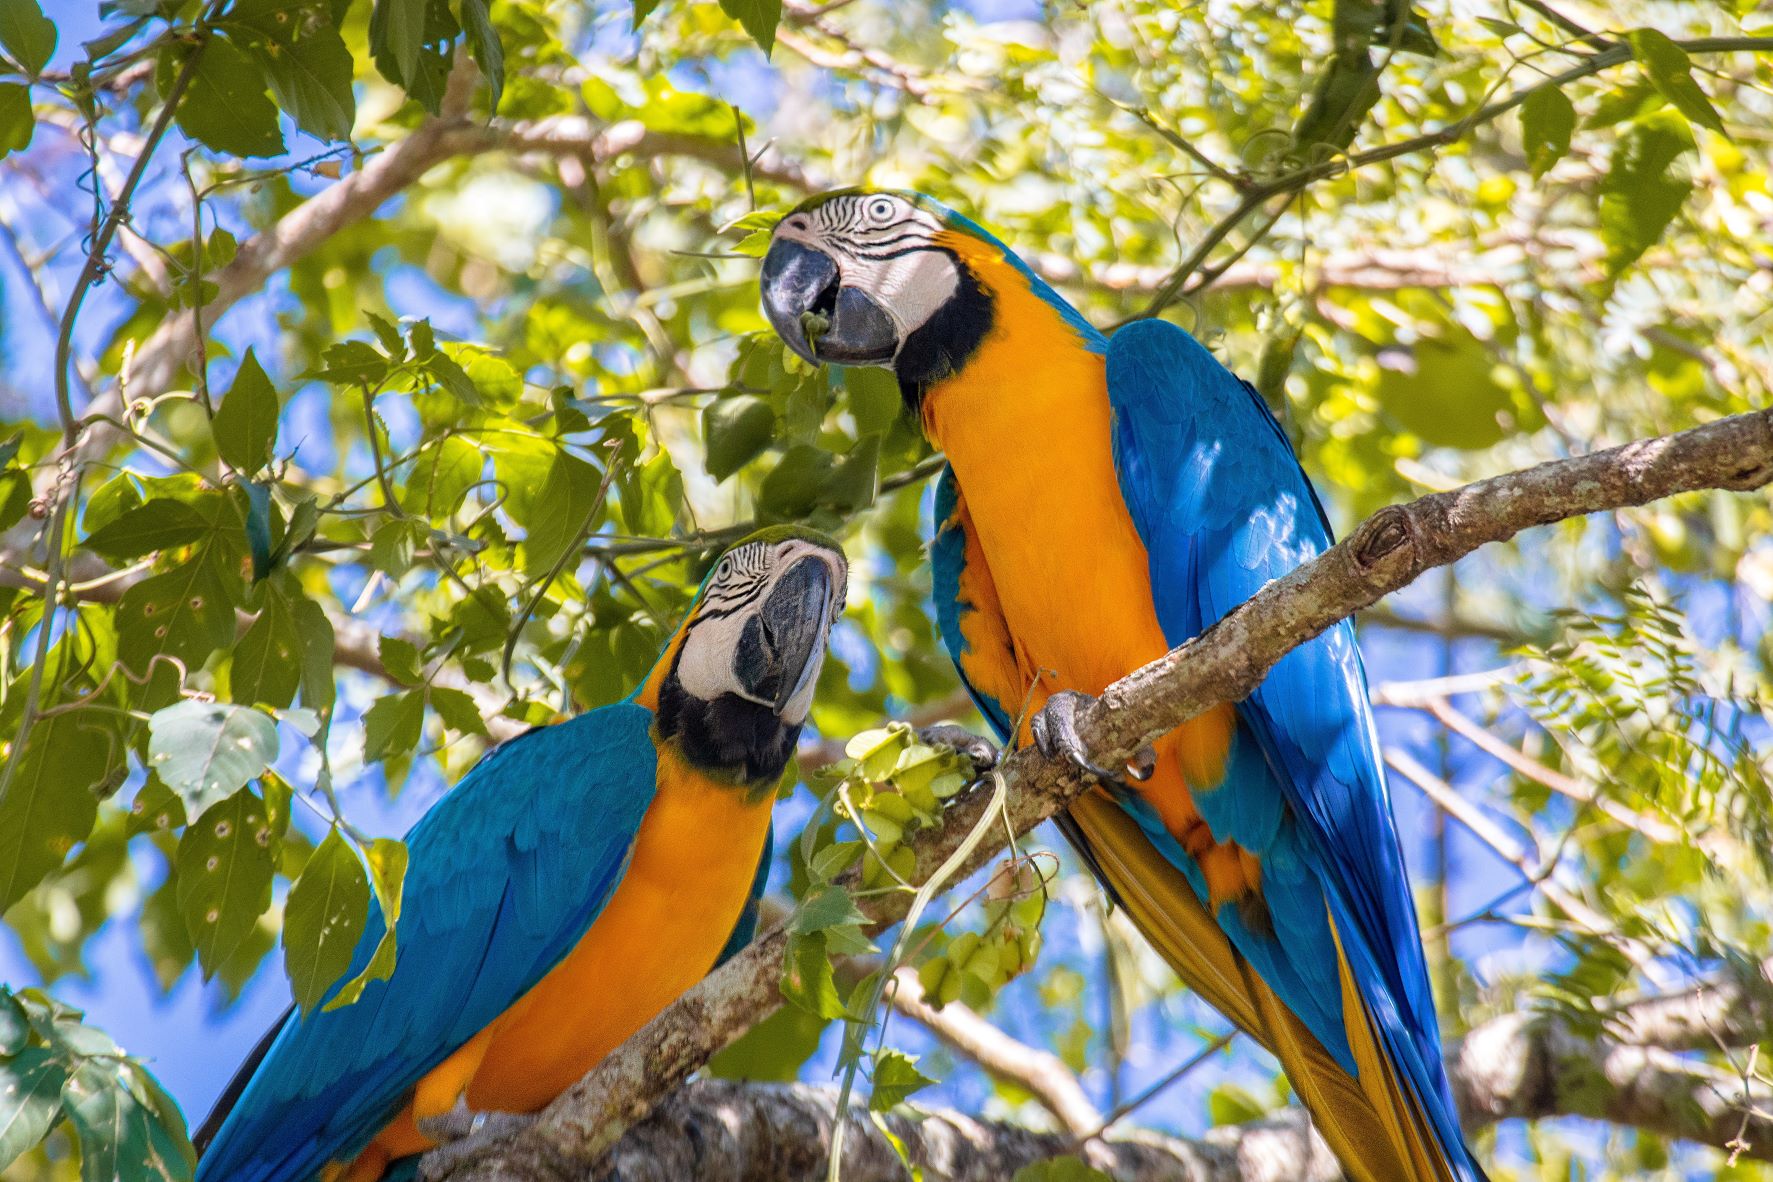 Parrots on a tree branch